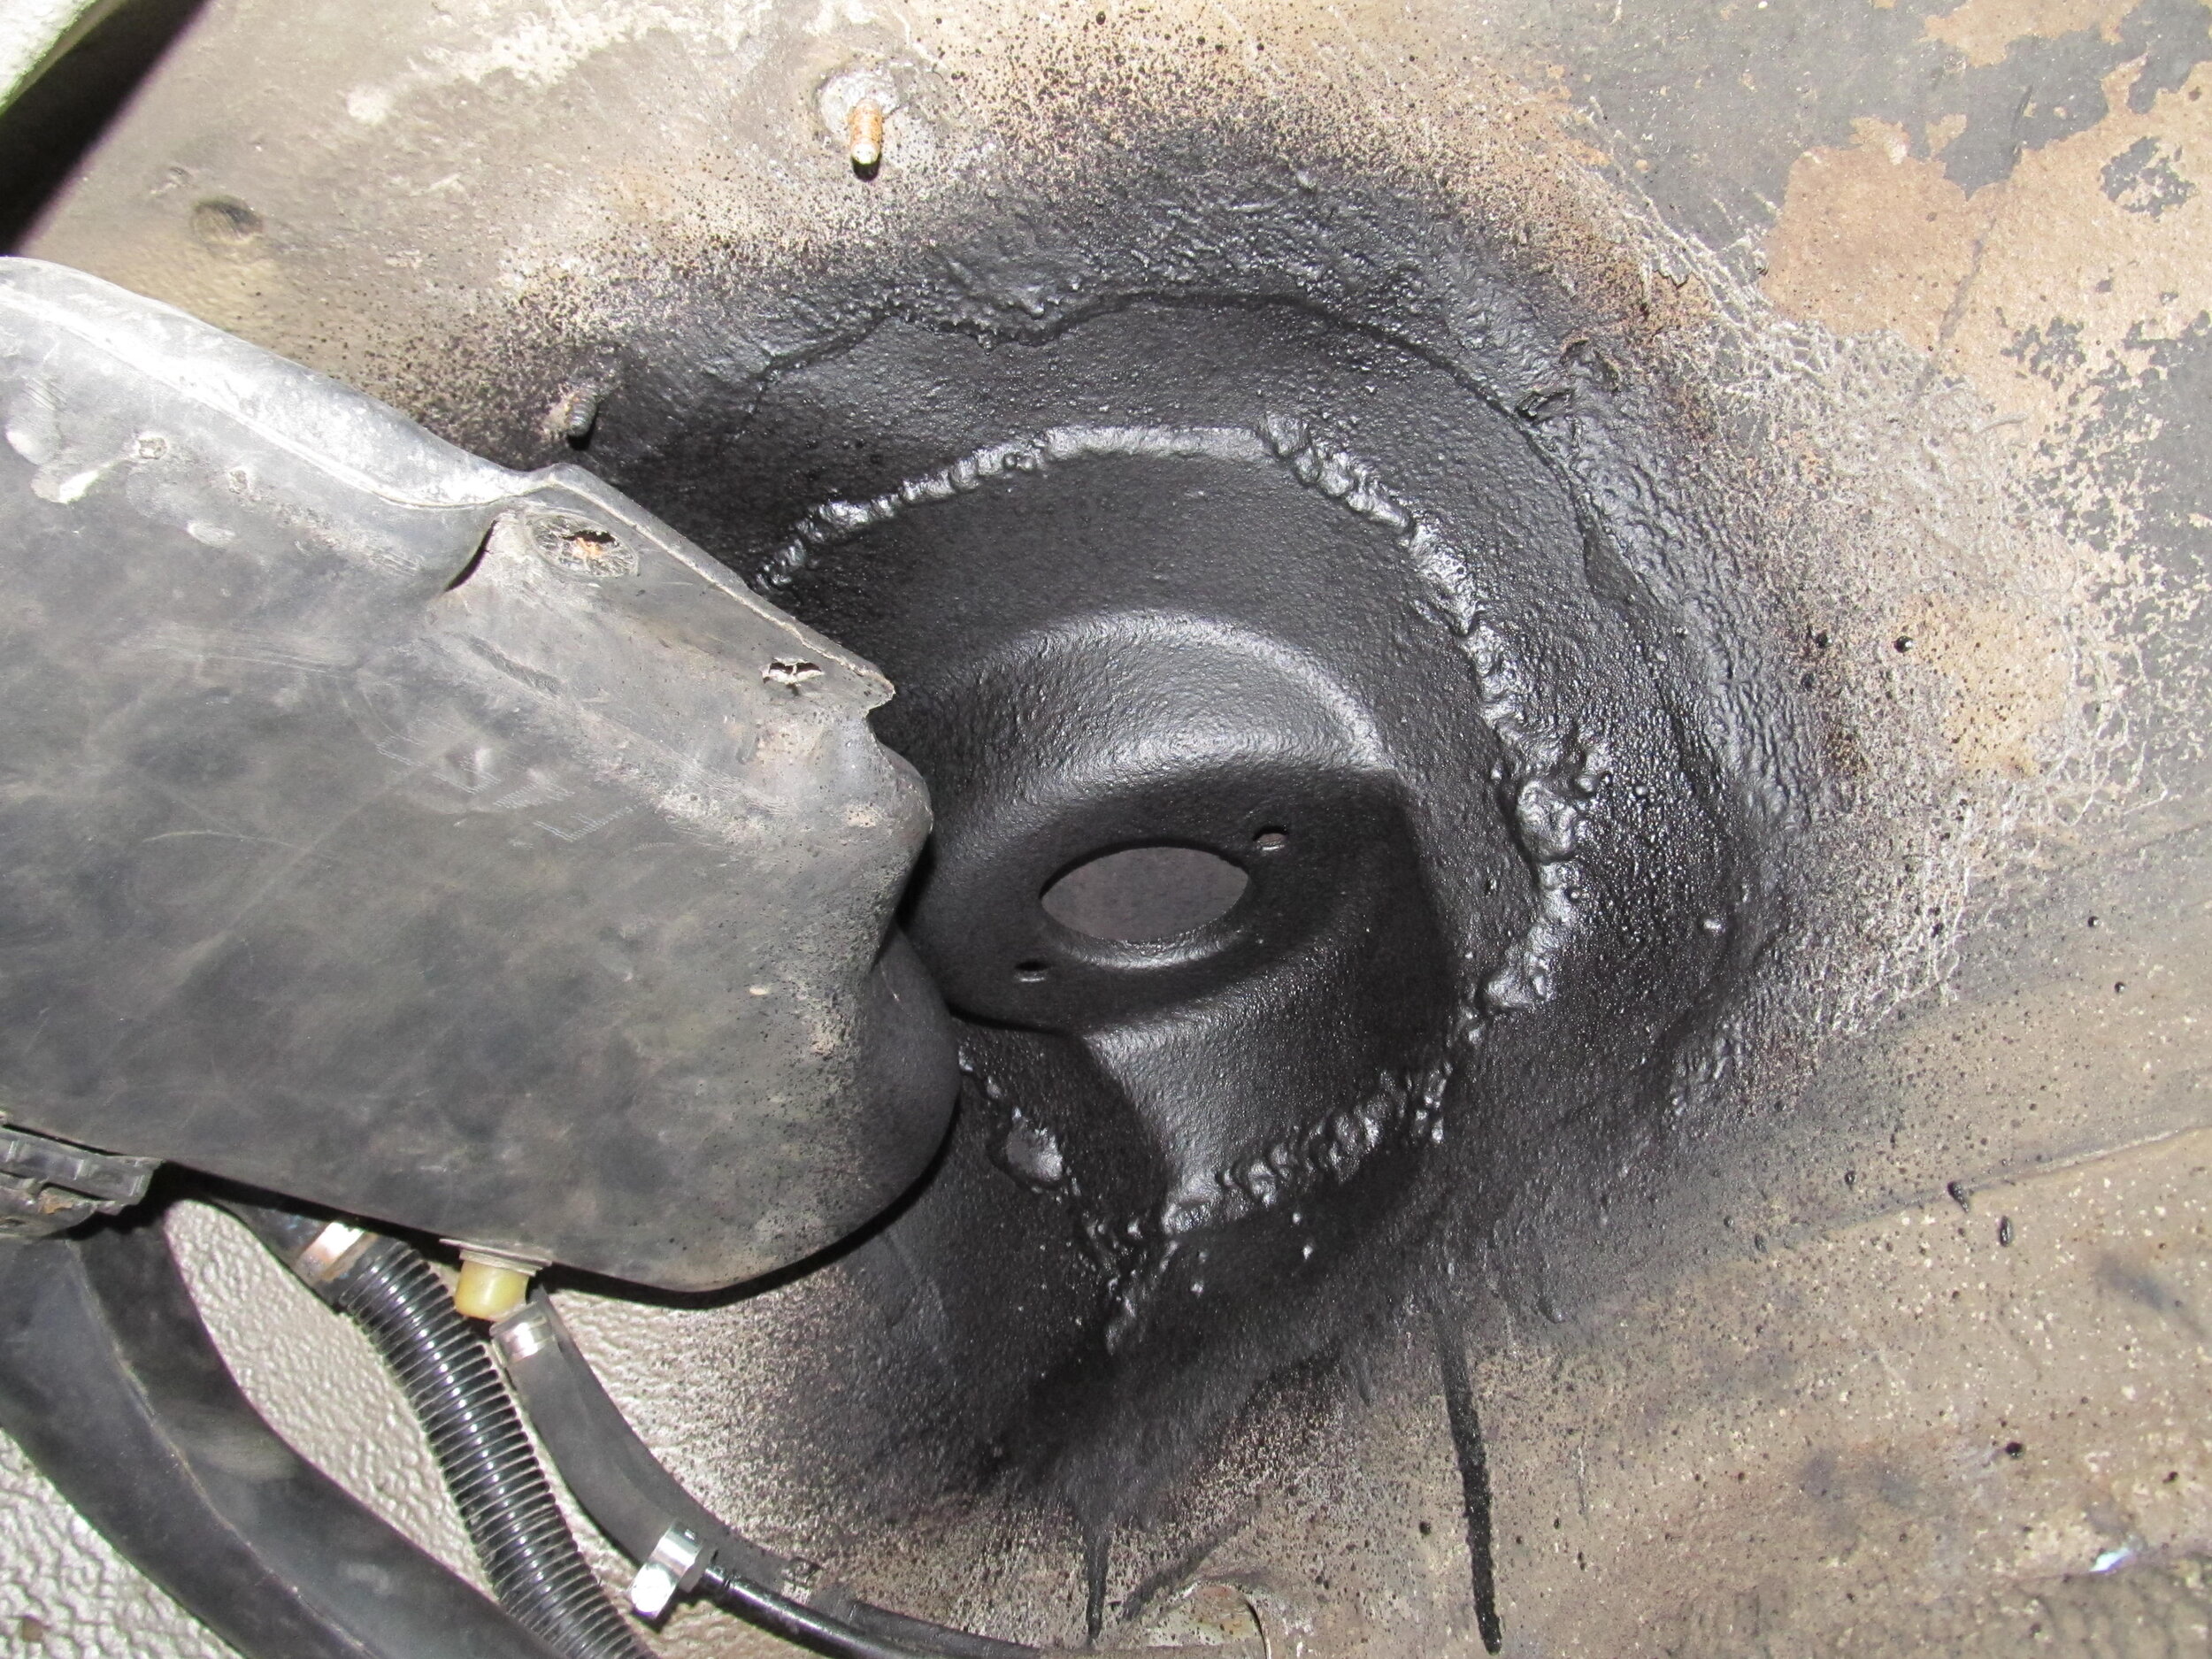 Localized applications of rubberized undercoating over POR15- remove it  all?, Grassroots Motorsports forum